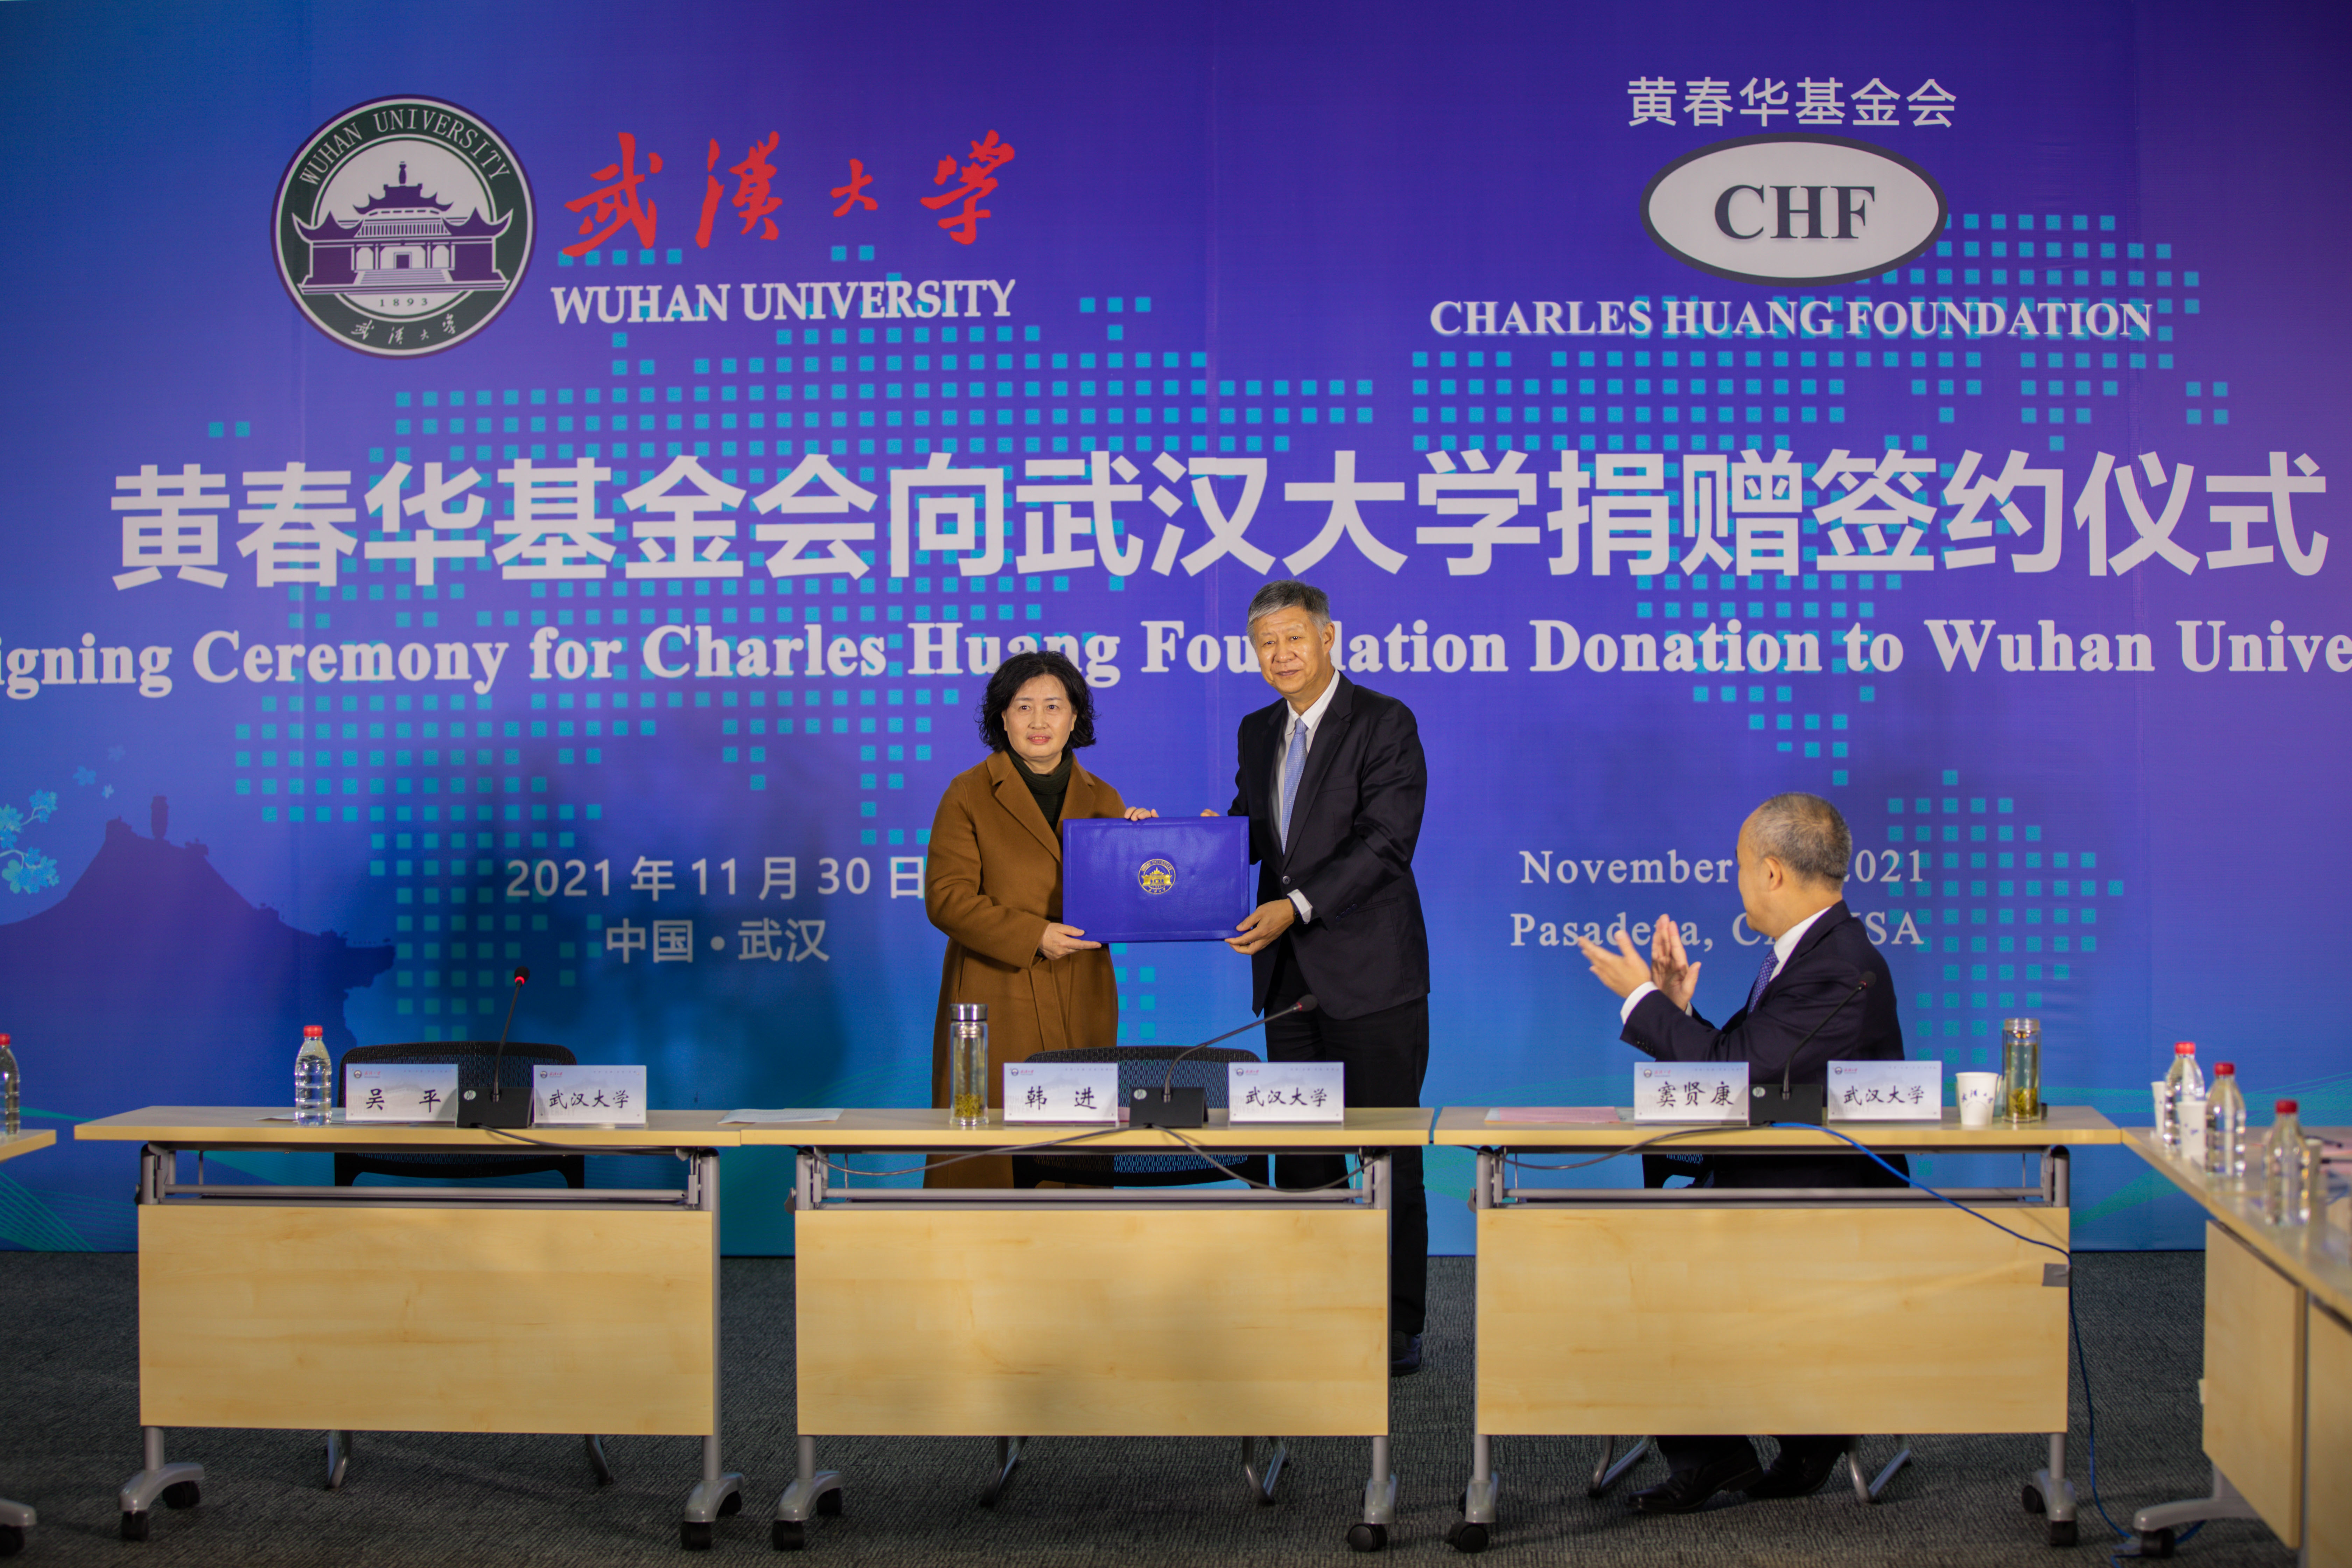 <h3>Charles Huang Foundation Makes Record-Breaking US$40 Million Donation to His Alma Mater, Wuhan University</h3><p>Pasadena, CA, USA, Nov 30, 2021 - (ACN Newswire) -  Charles Huang, PhD, through his philanthropic foundation---Charles Huang Foundation (CHF)---made a donation of US$40 million to Wuhan University of China at the celebration ceremony of the university's 128th anniversary, to express his appreciation to his alma mater and to promote the development of advanced education, health research and growth-driven innovation. This philanthropic gift is the single-largest personal donation ever received by Wuhan University. Together with the US$70 million landmark grant given by CHF to the University of Strathclyde in the UK in September, Dr Huang has donated a total of US$110 million to his two alma maters through his philanthropic foundation this year.</p><div class='time'>2022.12.02</div>